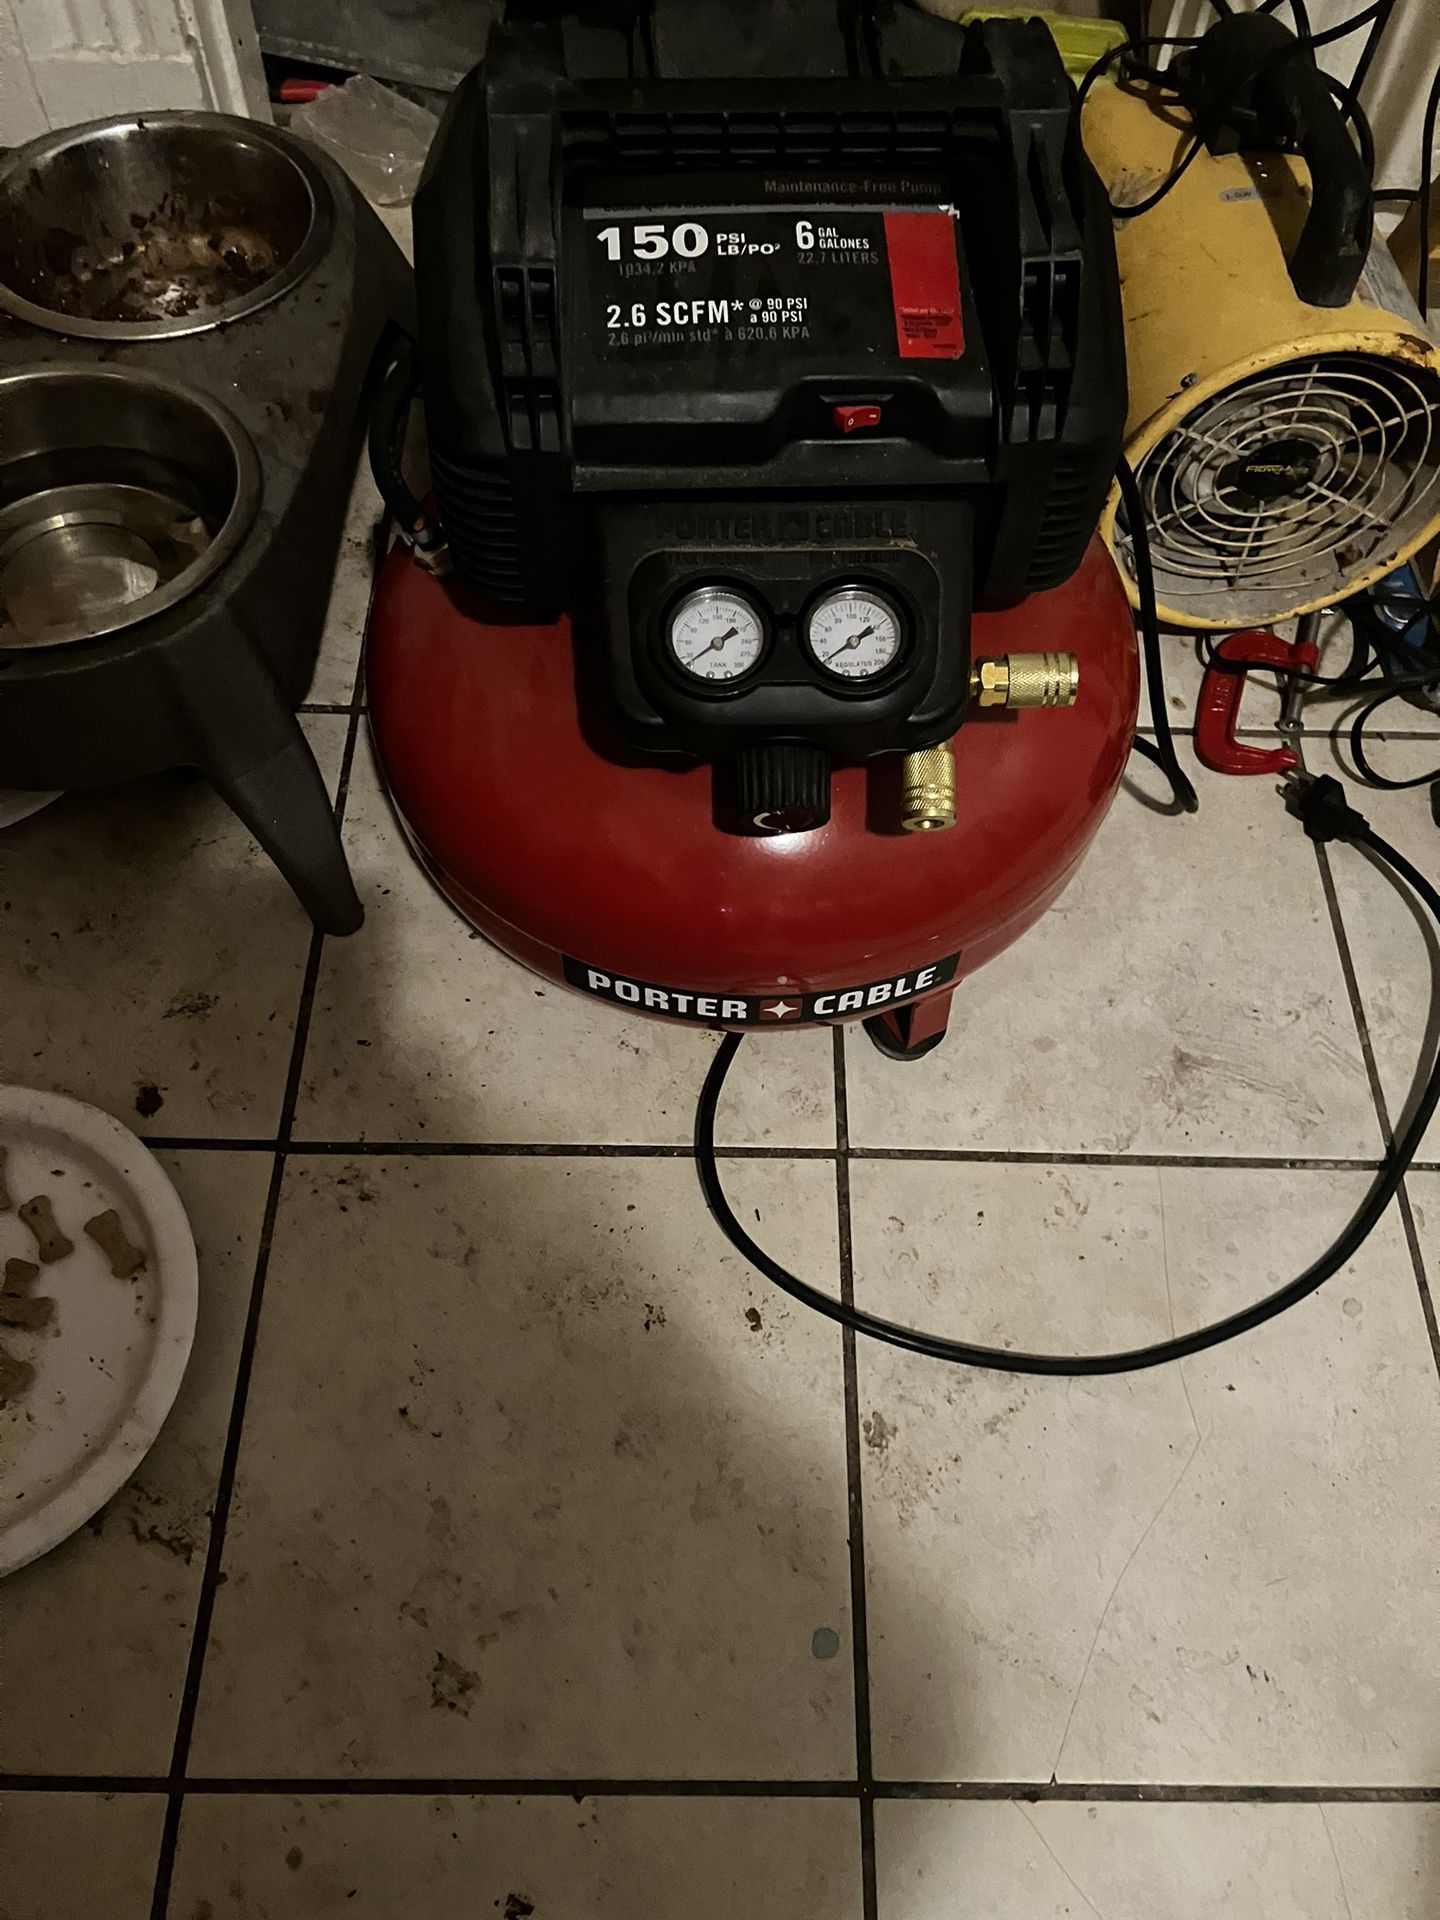 Air compressor, but any kind of tool